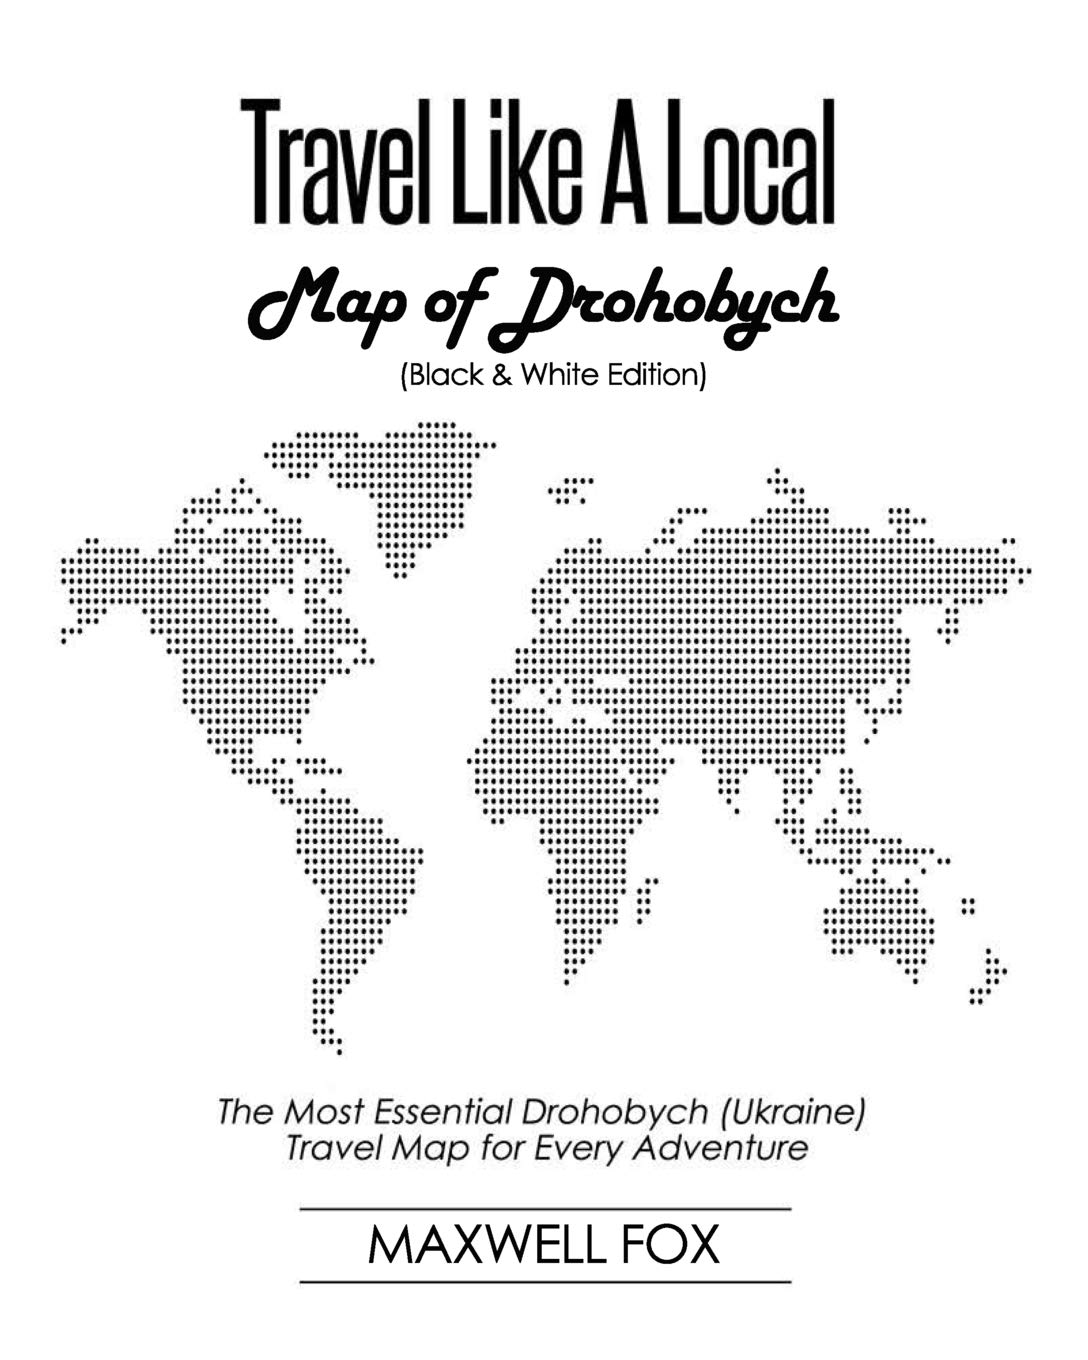 Travel Like a Local - Map of Drohobych: The Most Essential Drohobych (Ukraine) Travel Map for Every Adventure